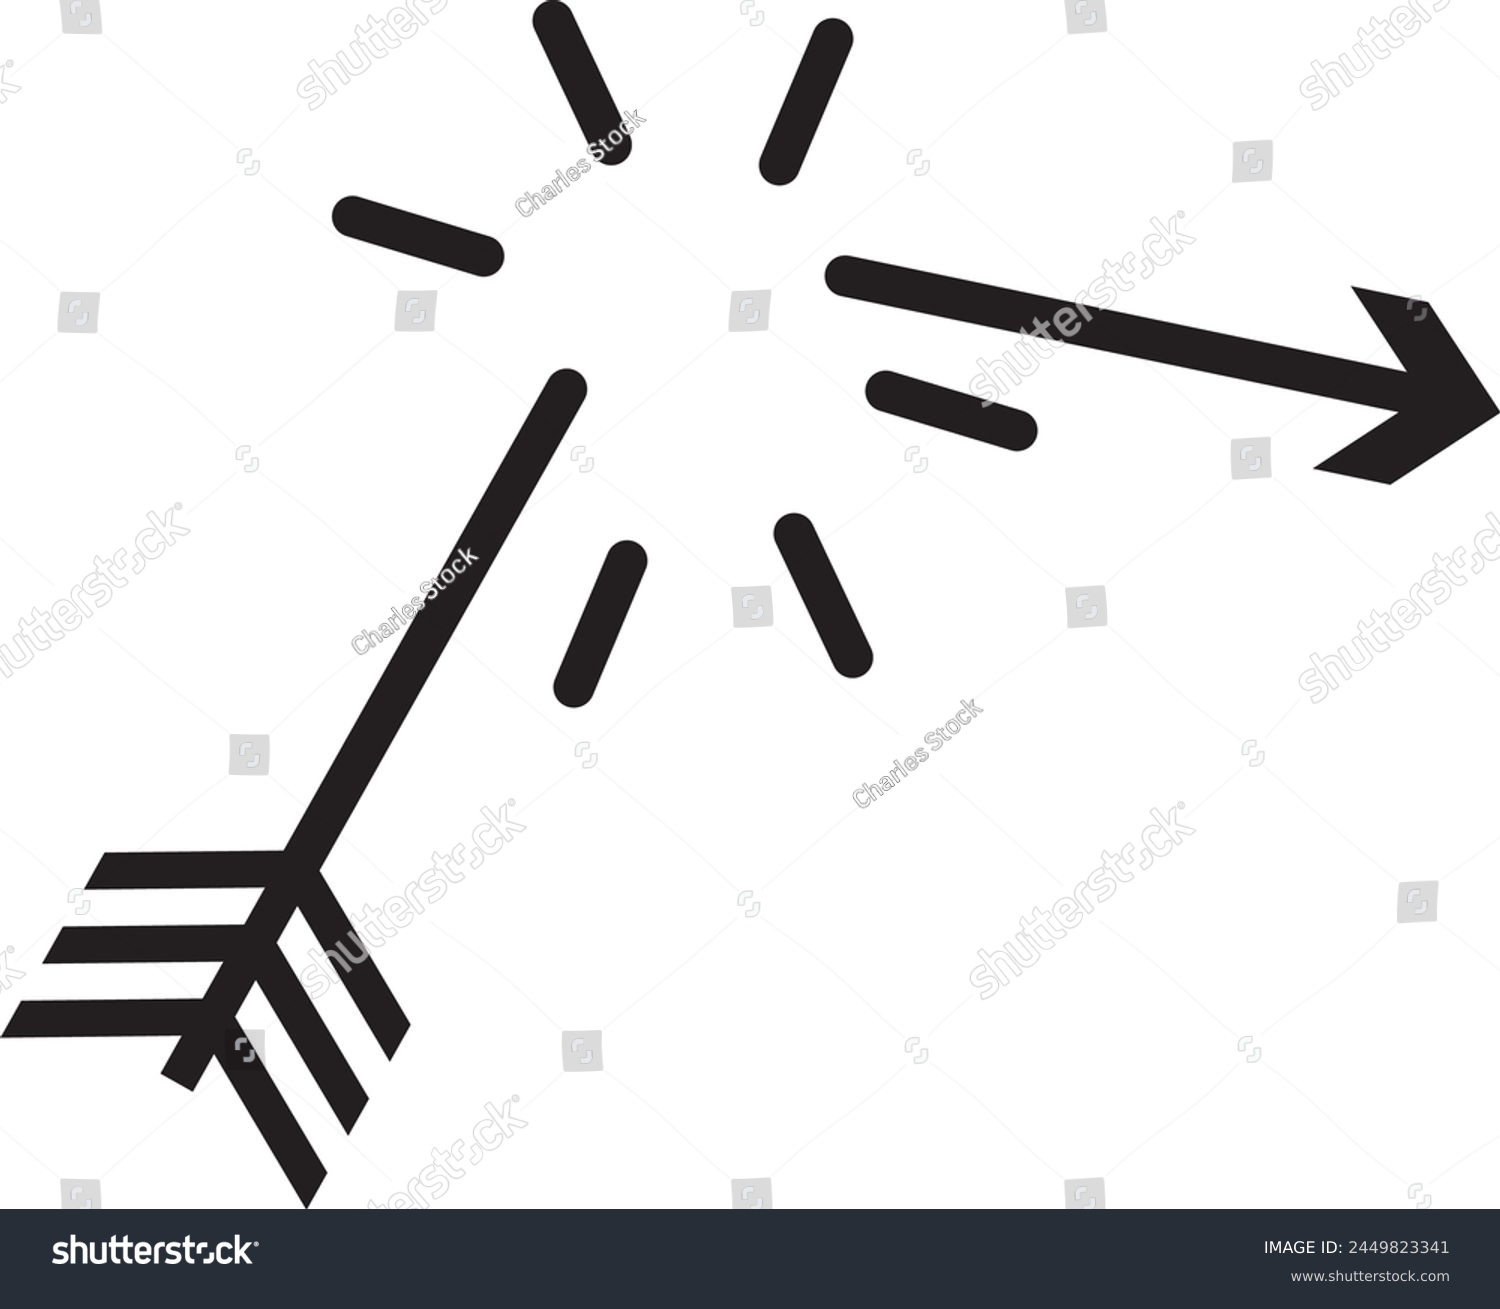 SVG of Broken Arrow icon vector. Can be used for Archery. illustration with flat style svg